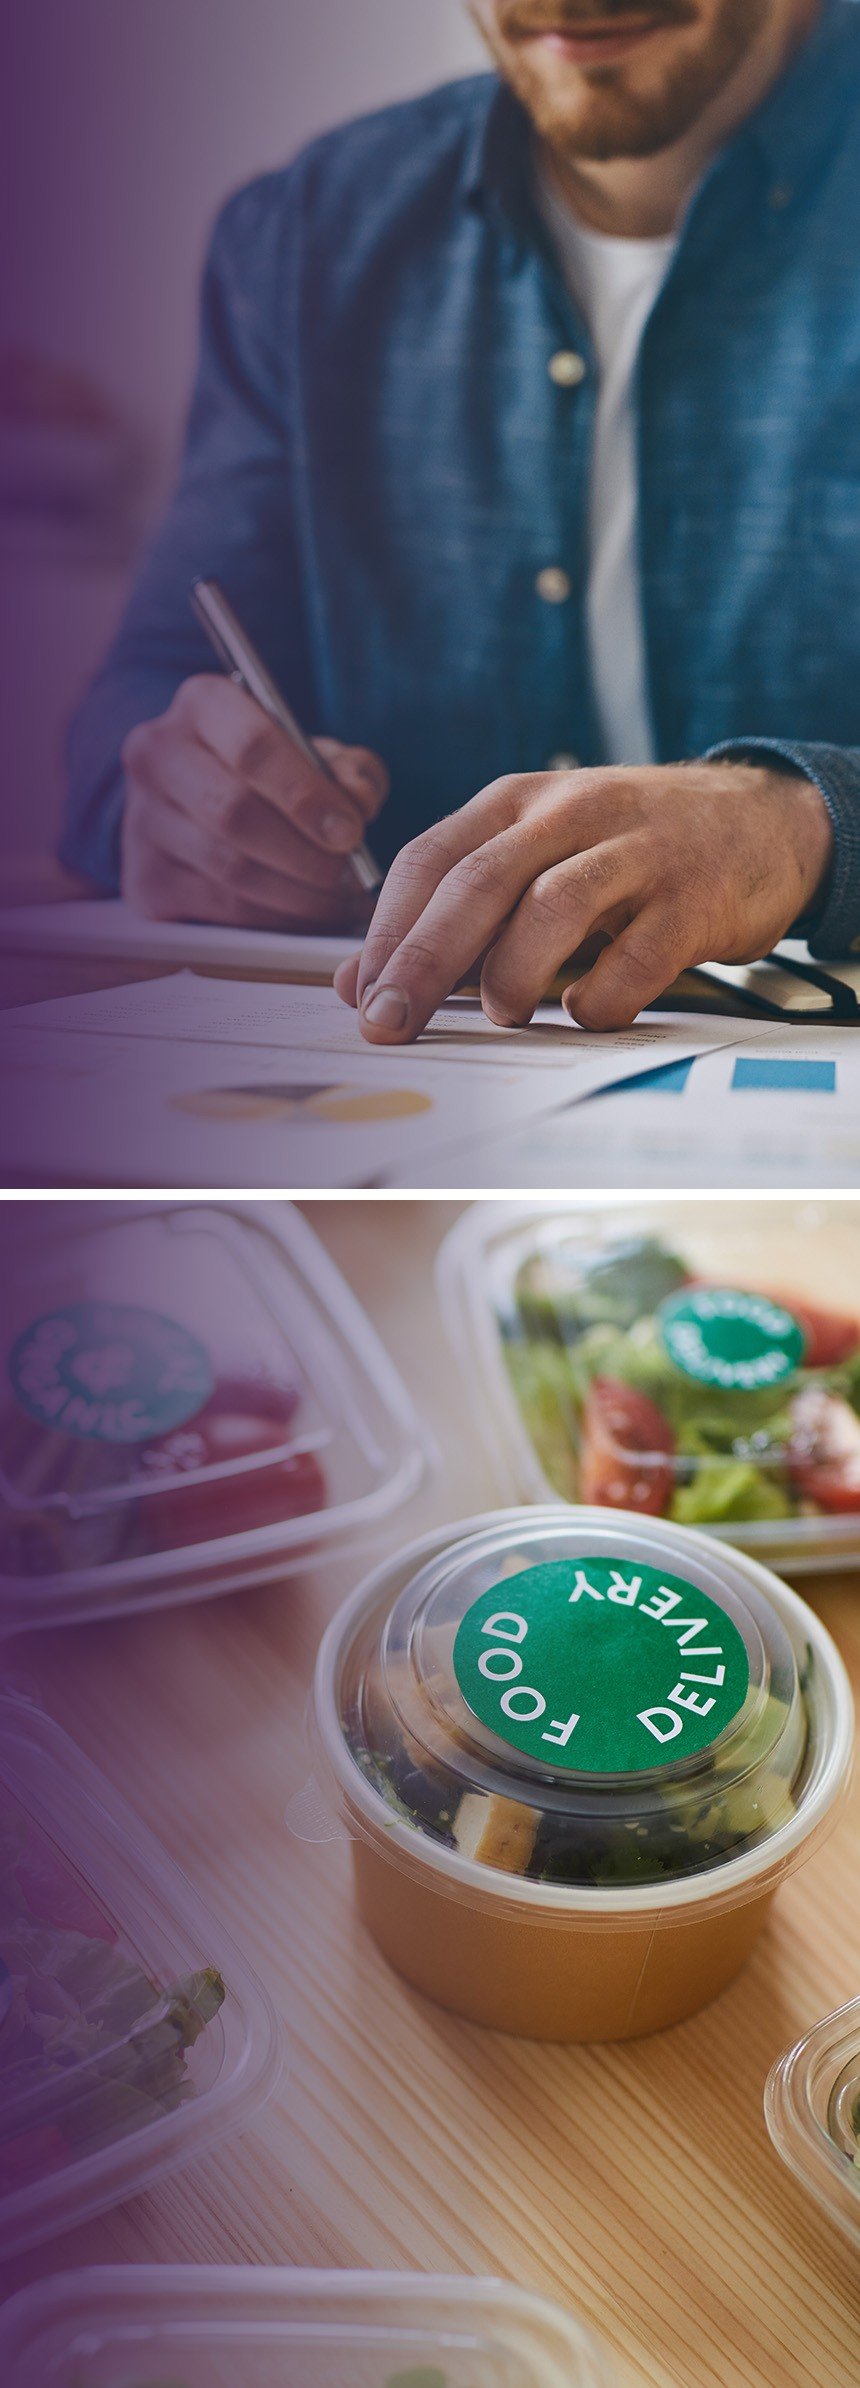 Two image collage: One of a man writing on a piece of paper, the other, some packed food in plastic containers with a custom printed label